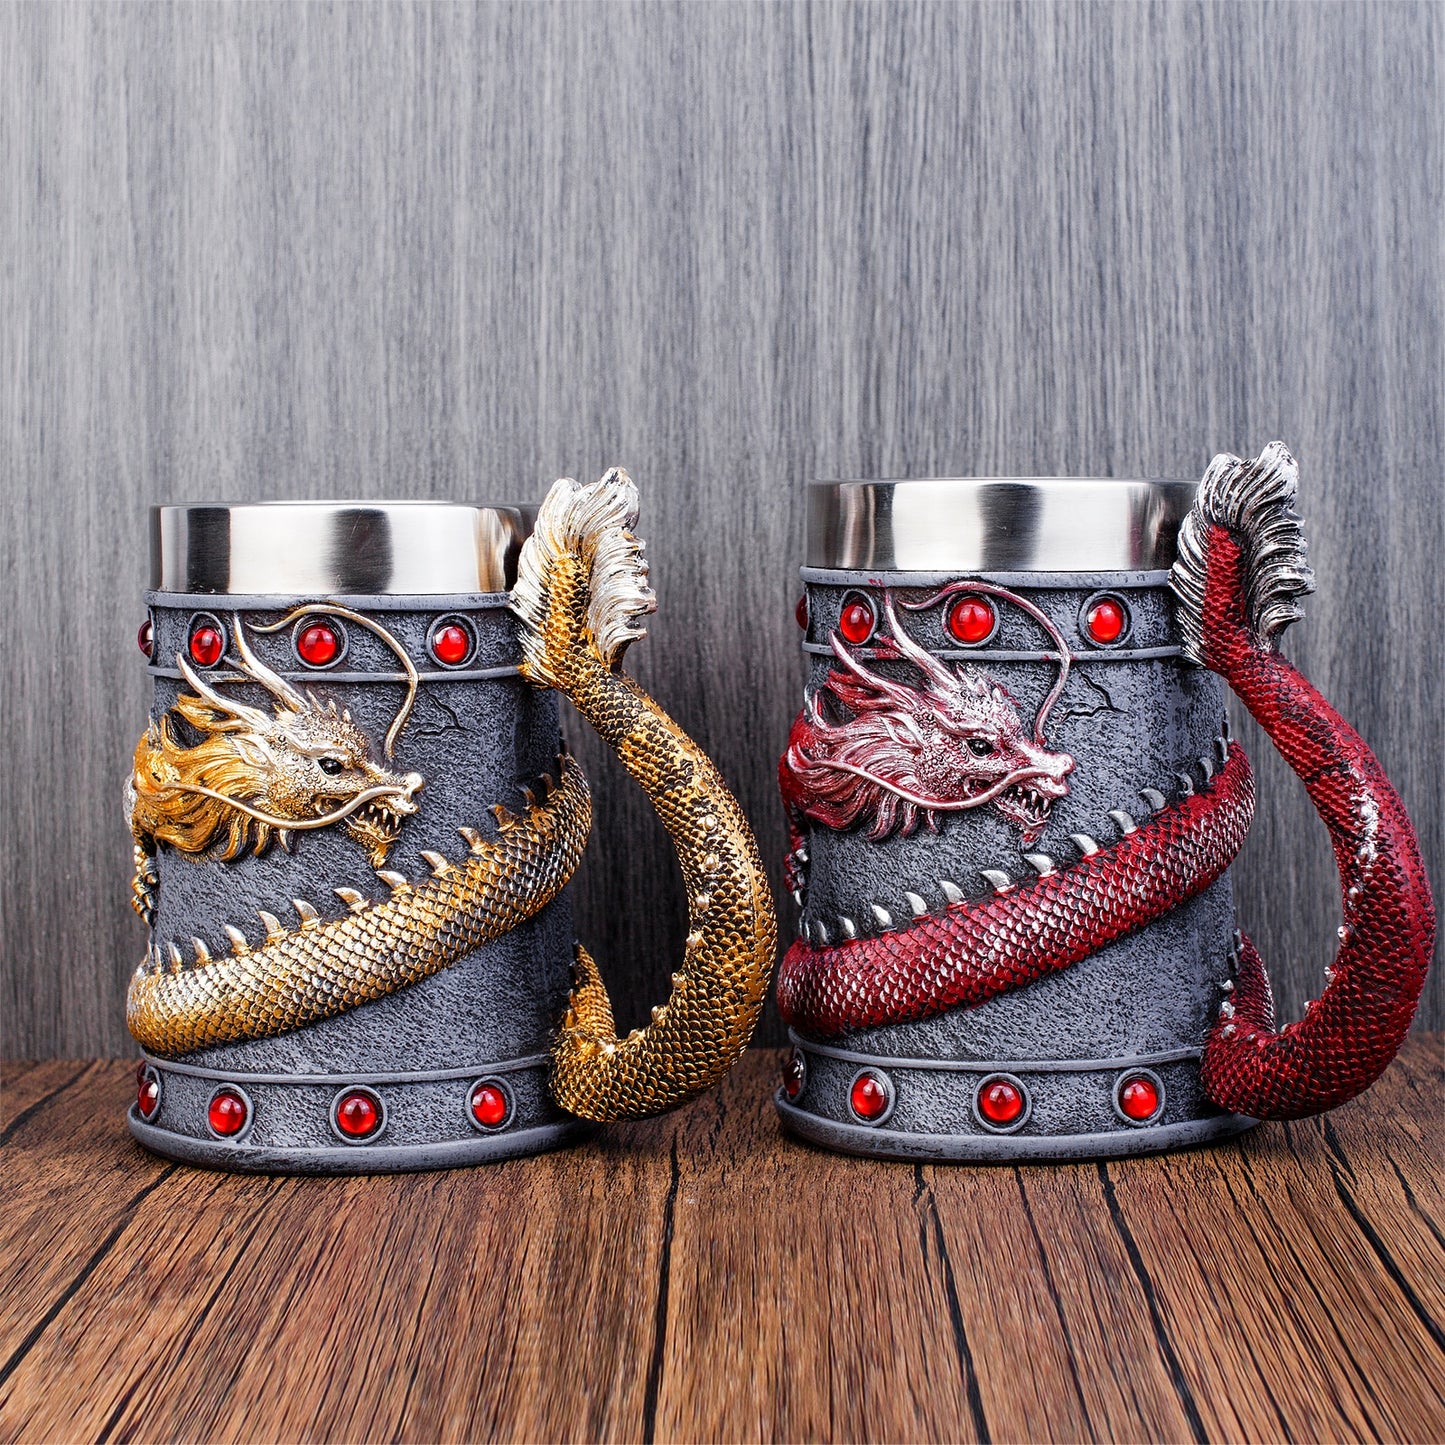 Mighty dragon tankard of beer by glasscias